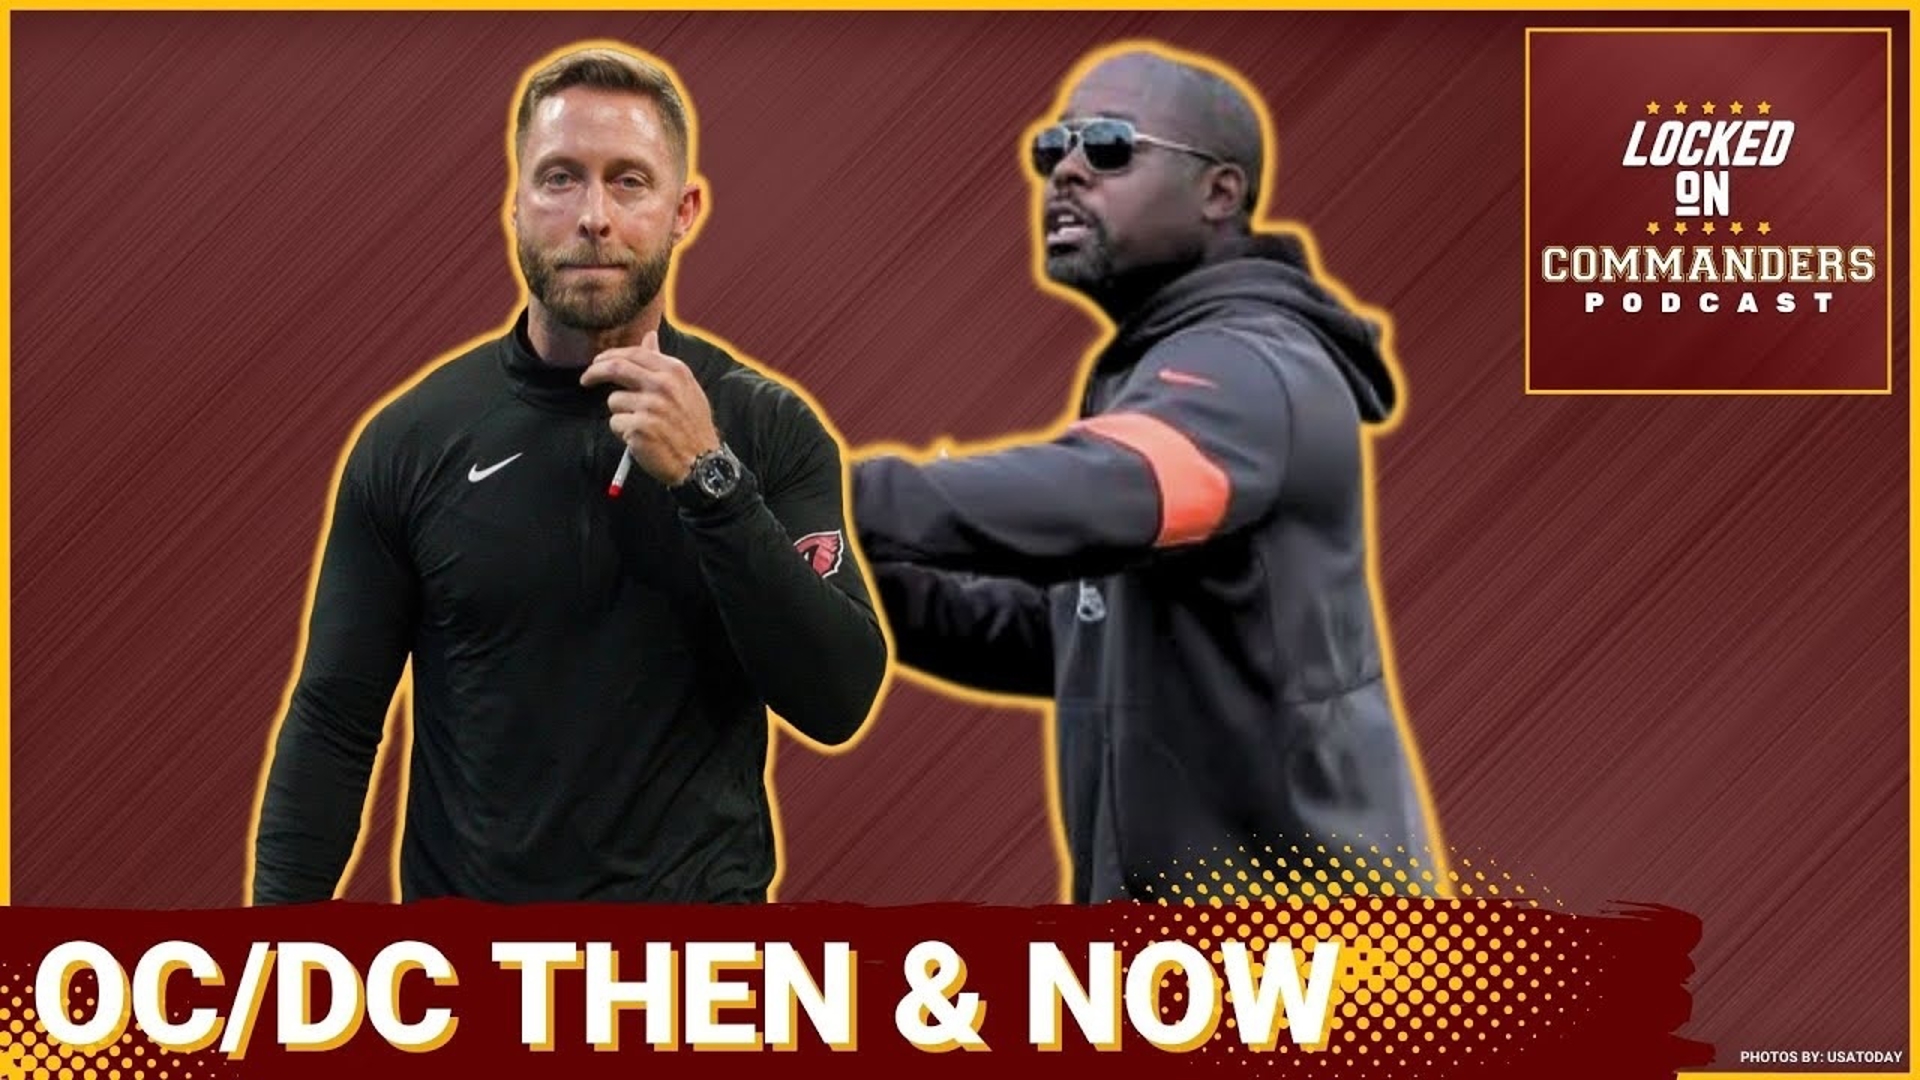 The Washington Commanders have a new look with coordinators Kliff Kingsbury and Joe Whitt Jr., but how different is it from Ron Rivera and Eric Bieniemy?